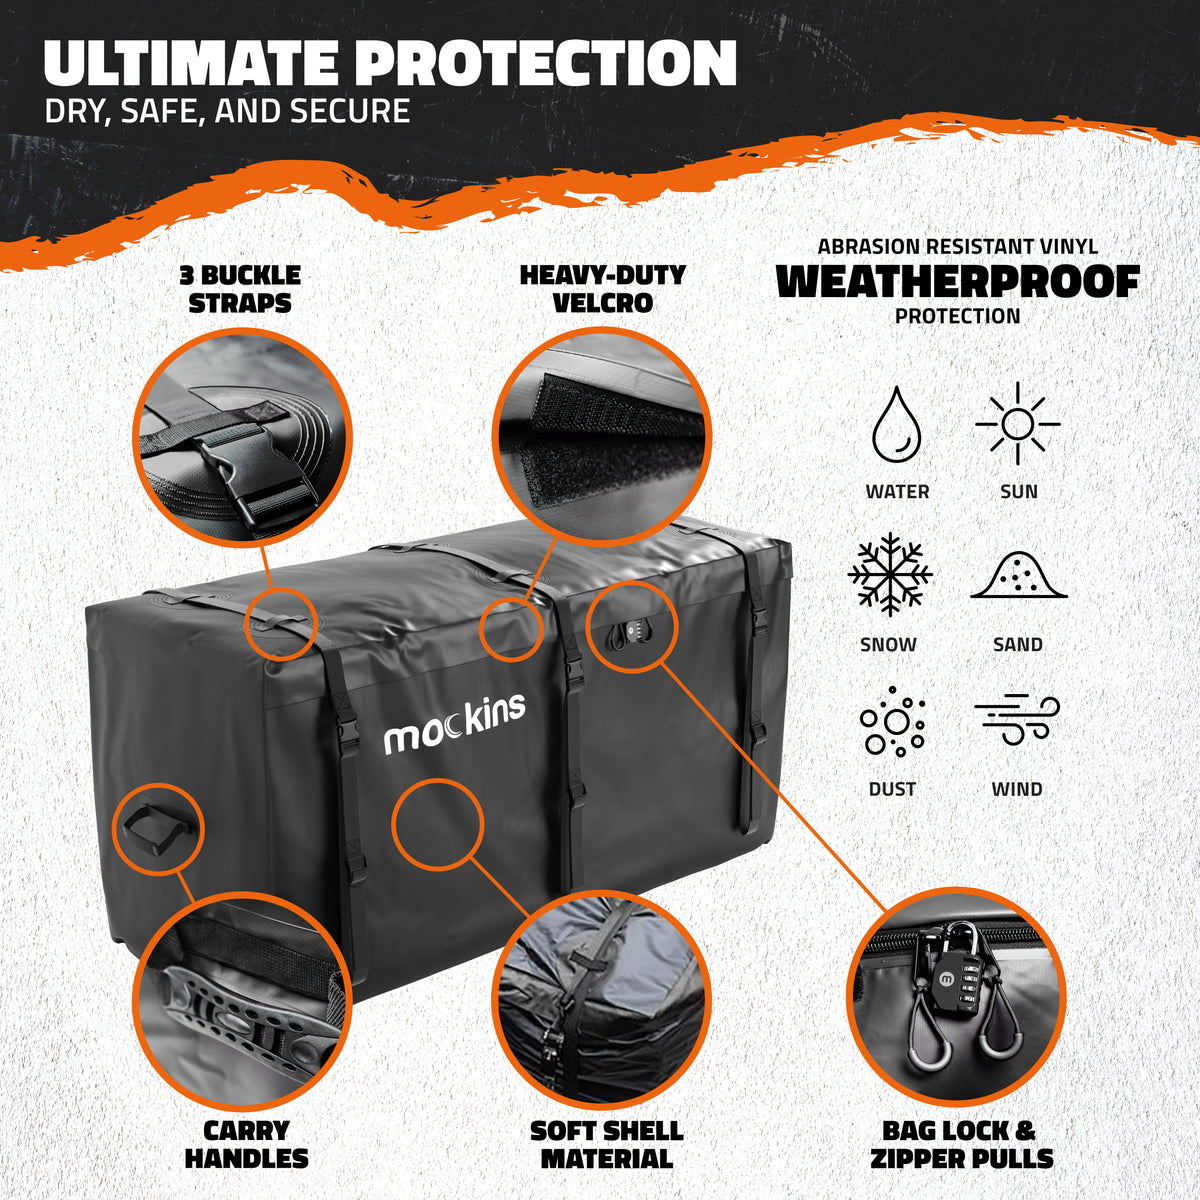 Waterproof Hitch Mount Cargo Carrier Bag - 25 Cubic Ft.